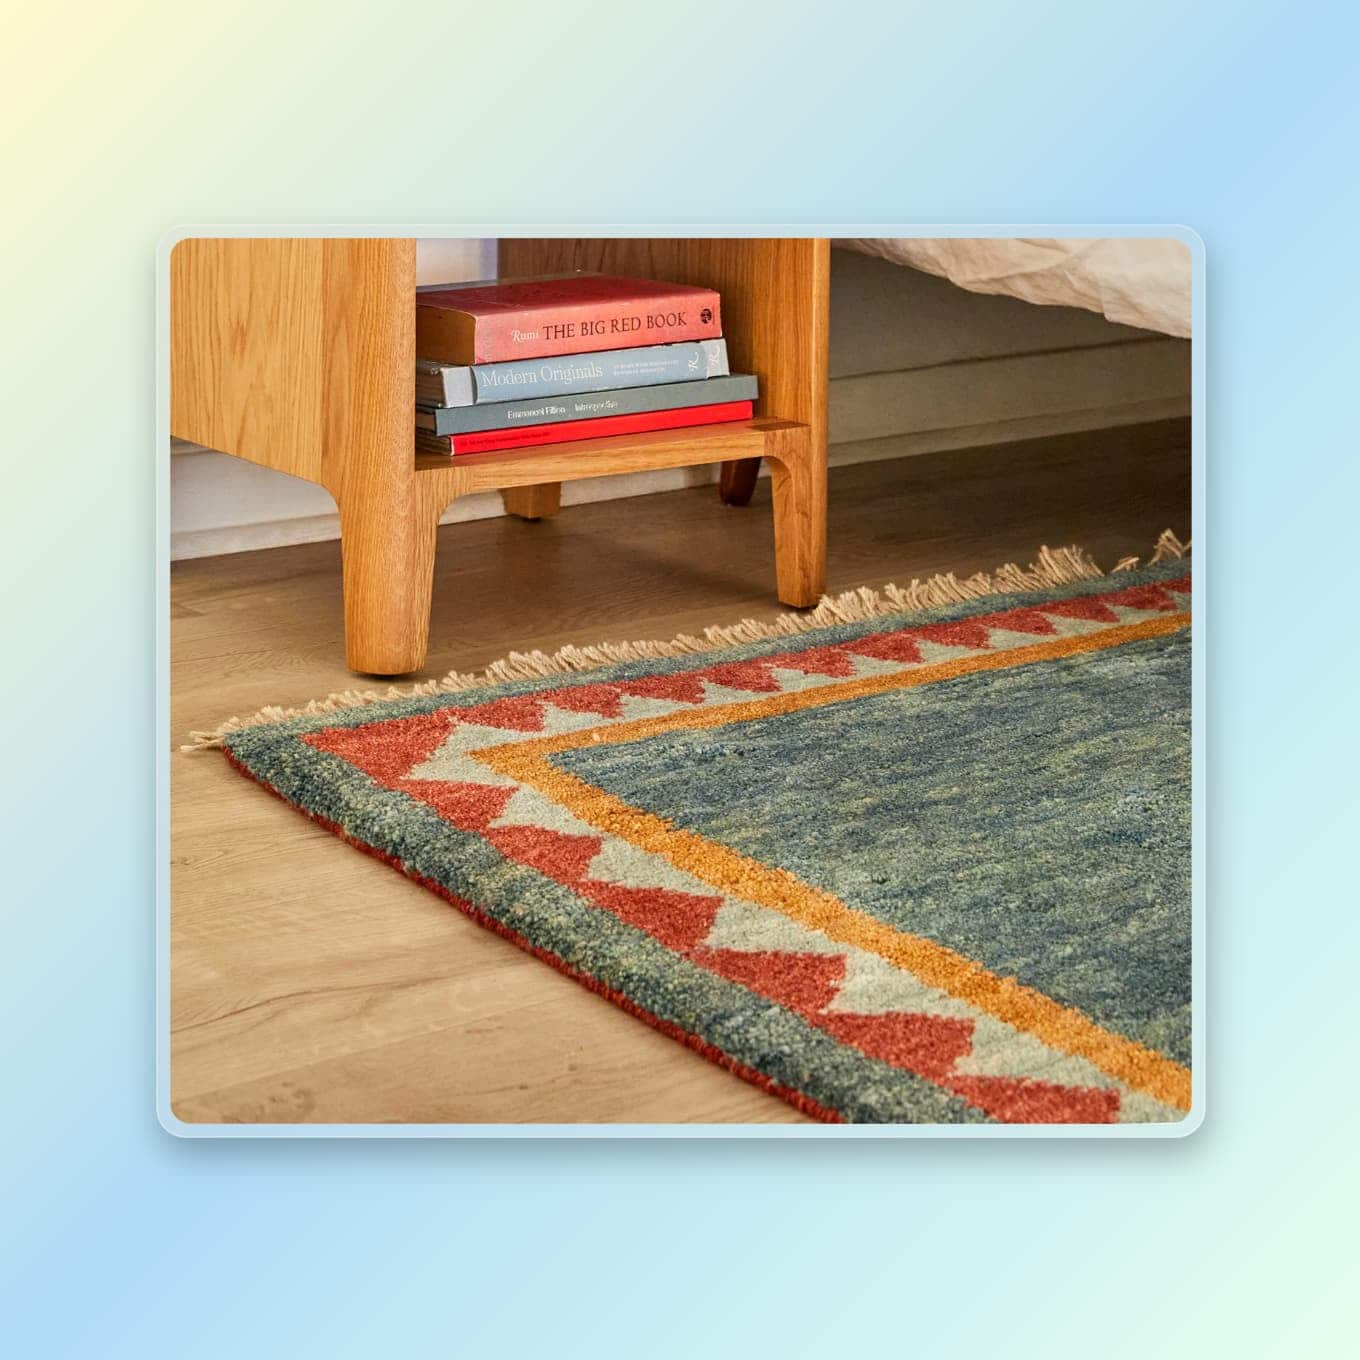 A colorful rug peeking out from under a bed